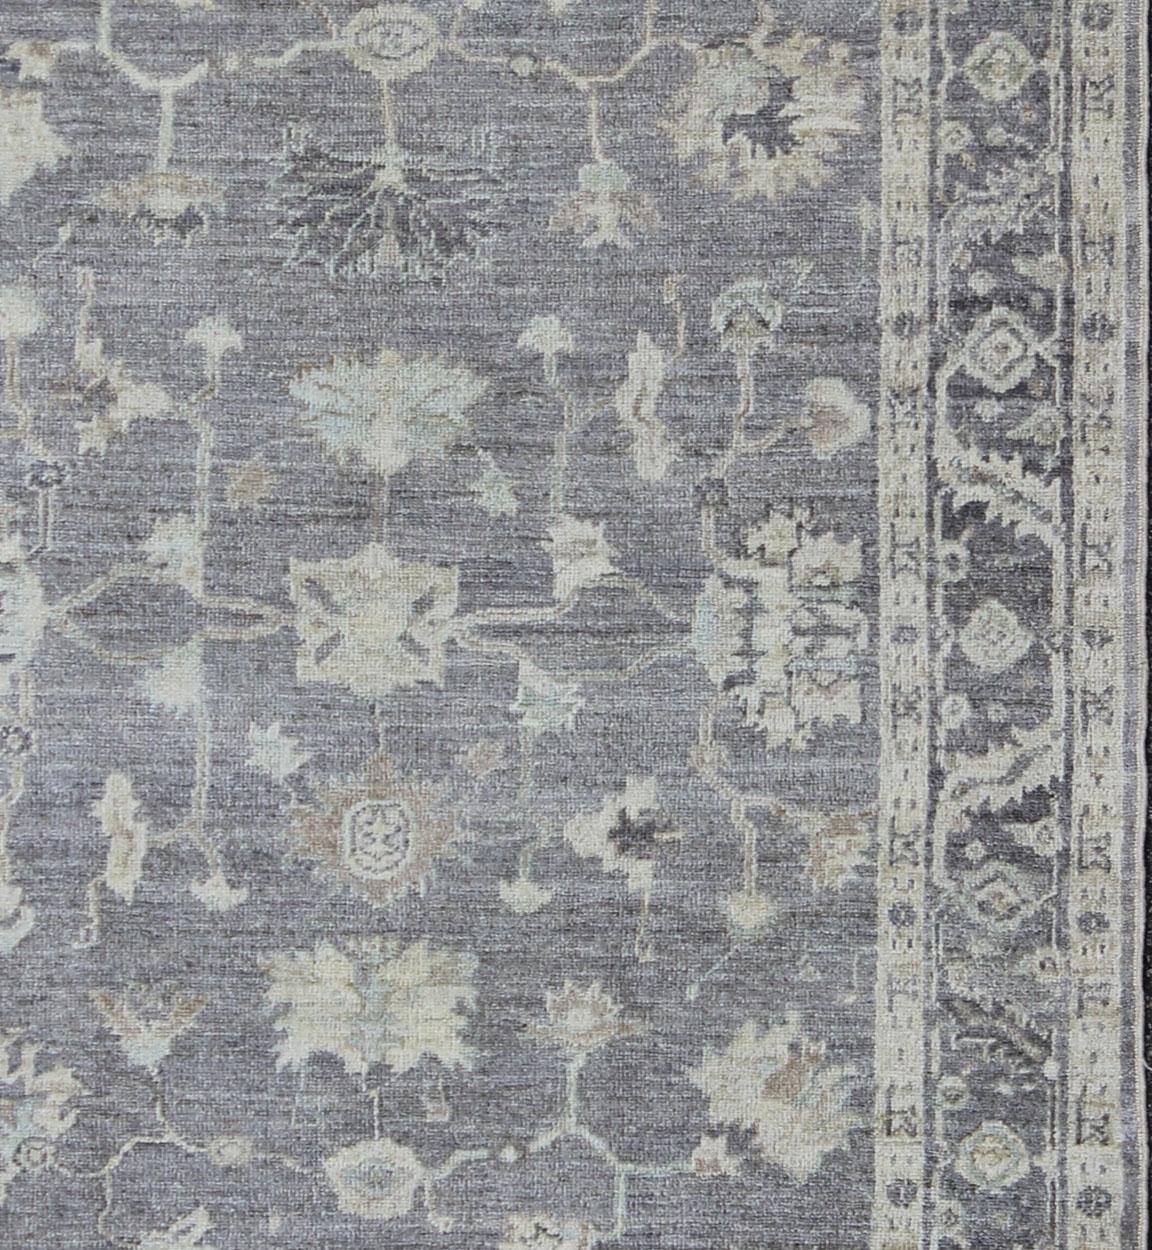 Shades of gray Gallery Angora Ushak rug from Turkey, rug AN-123686, country of origin / type: Turkey / Angora Oushak.

Measures: 6'1 x 11'3 

From our Angora collection, this piece is made with a combination of angora and old wool. Featuring all